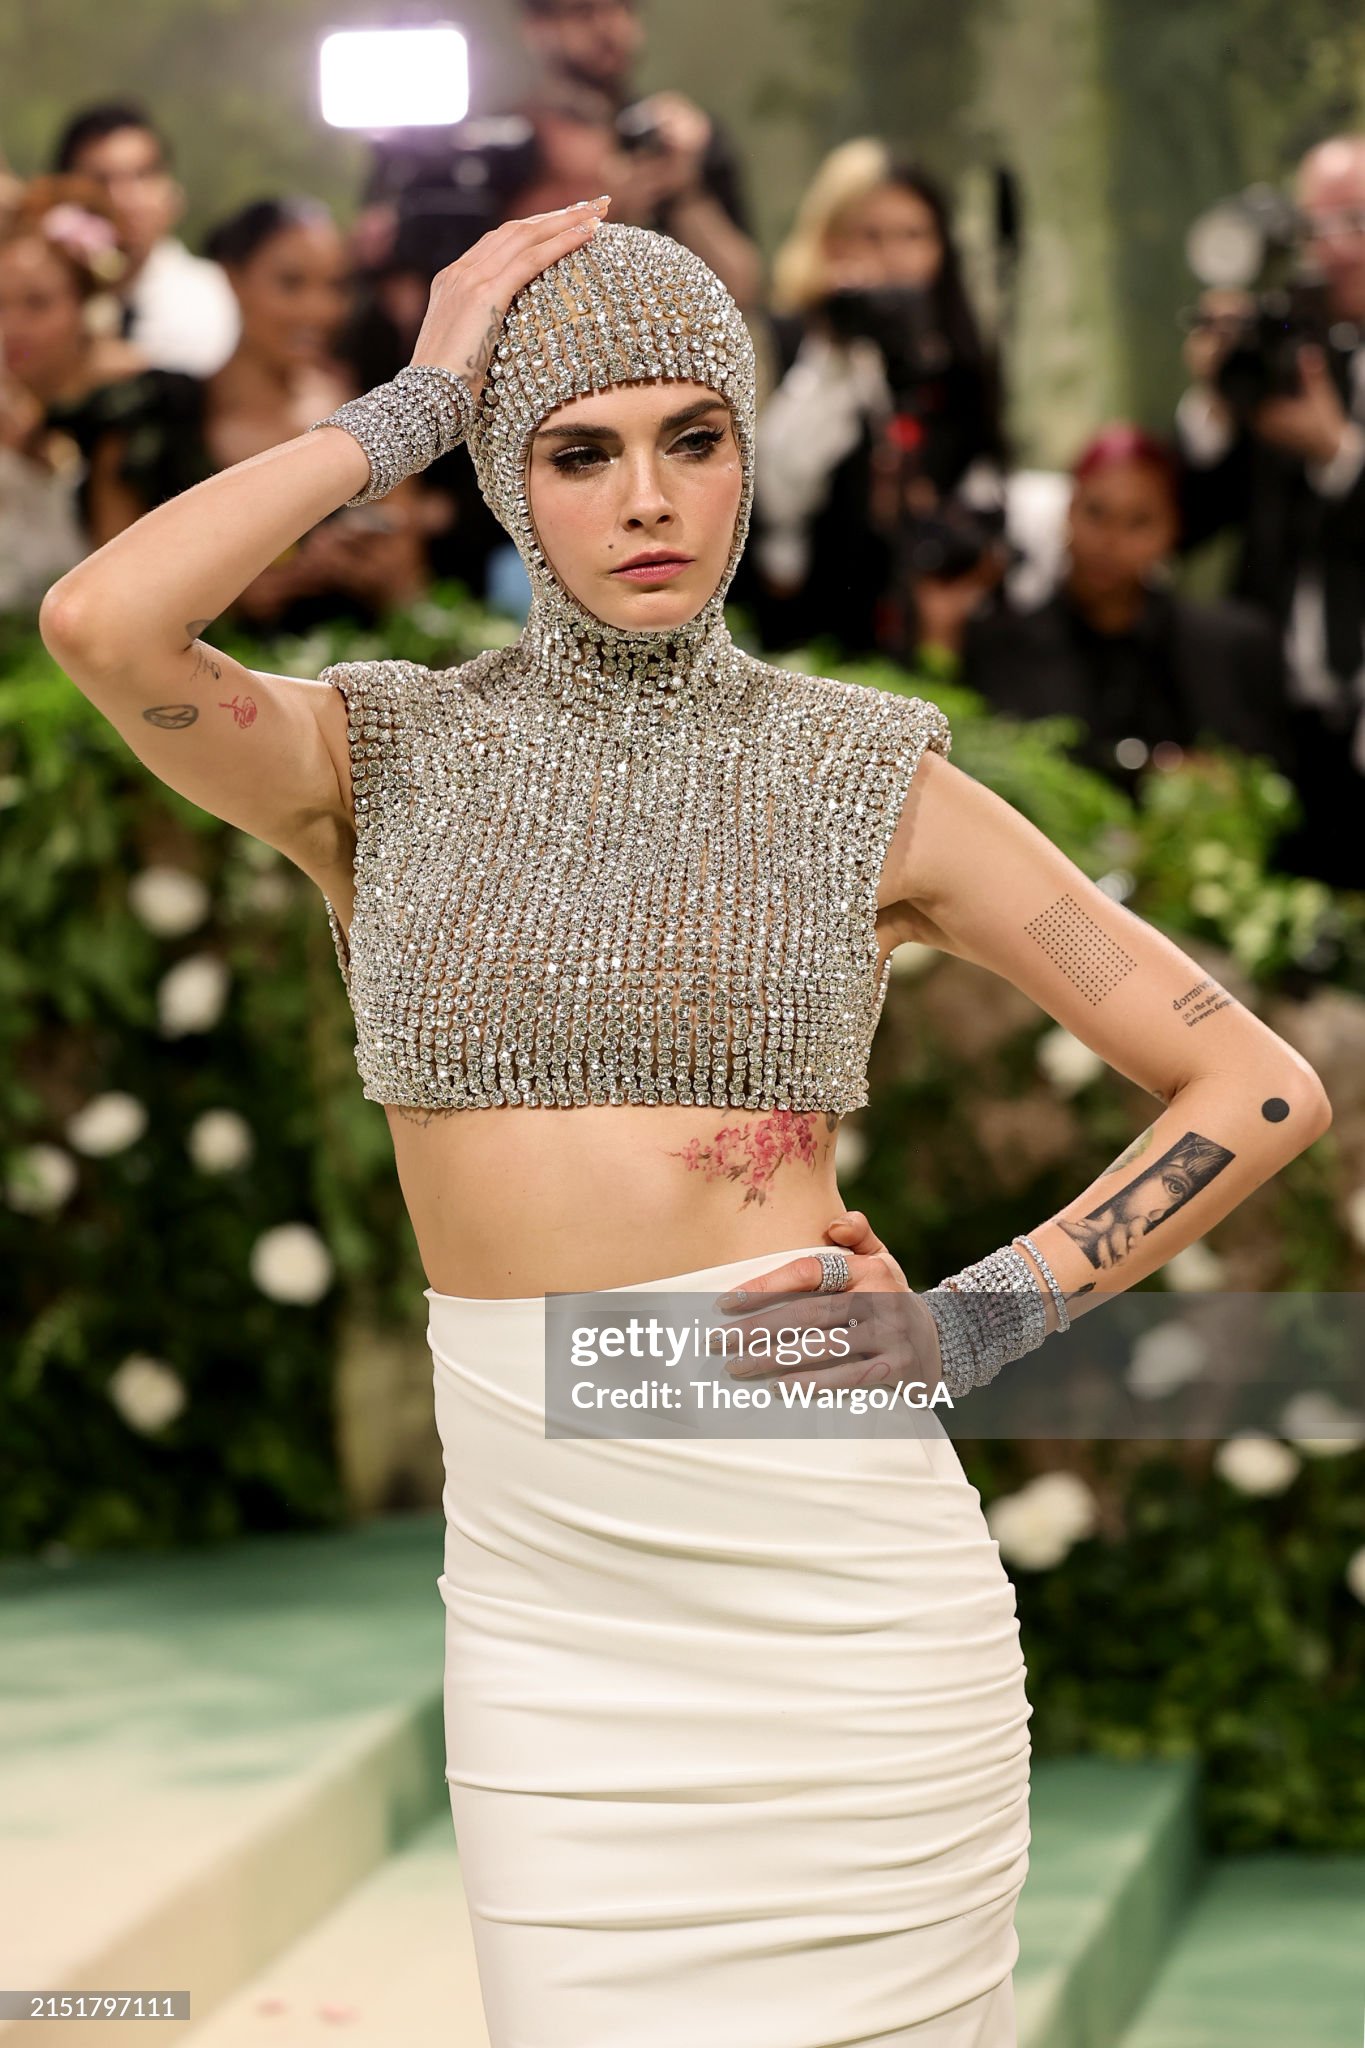 gettyimages-2151797111-2048x2048.jpg